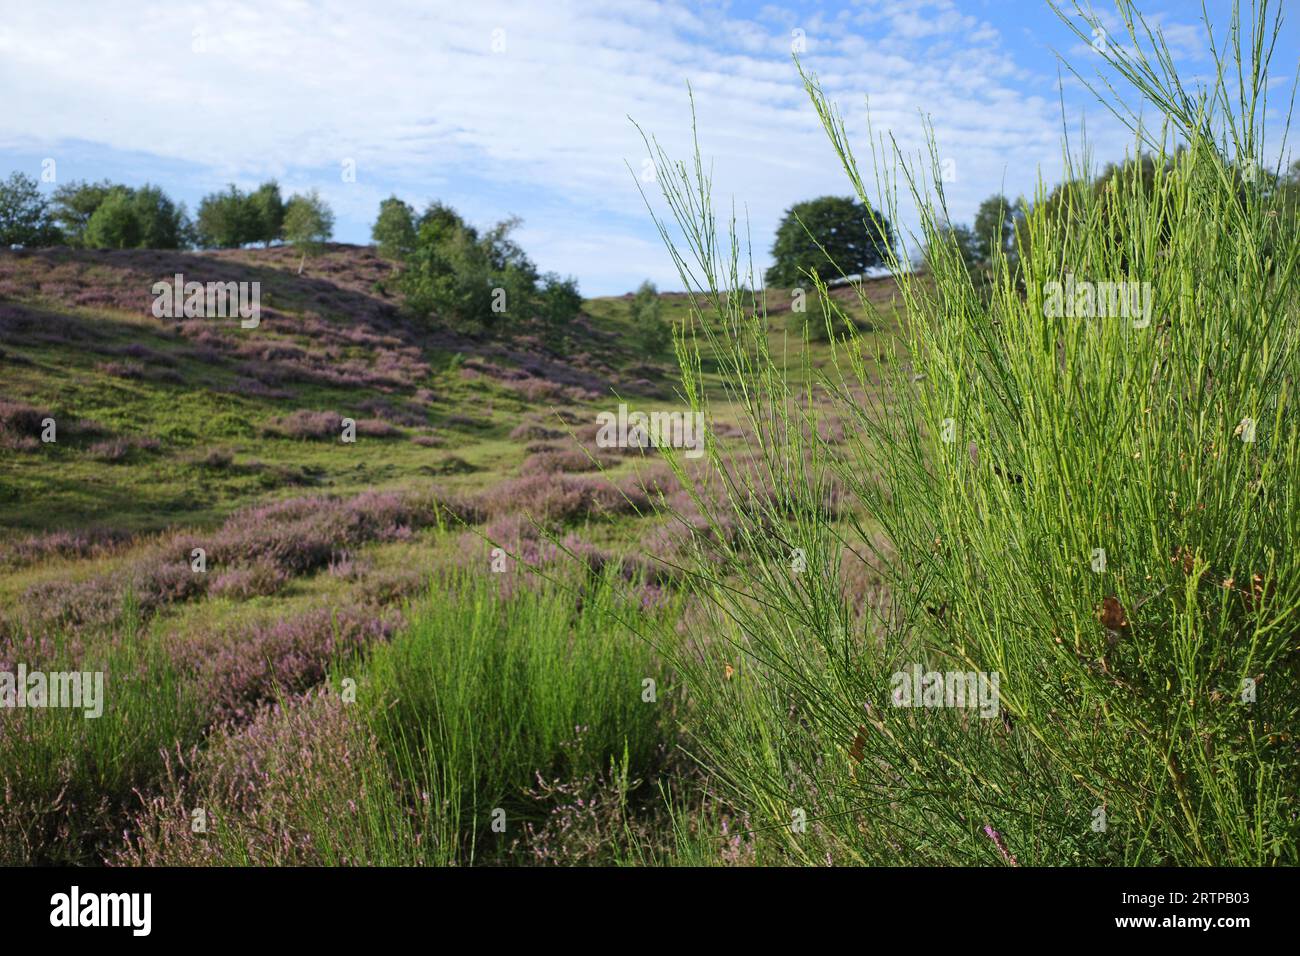 The breathtaking heath landscape in the Posbank, the Netherlands. A light green common broom grows in front Stock Photo